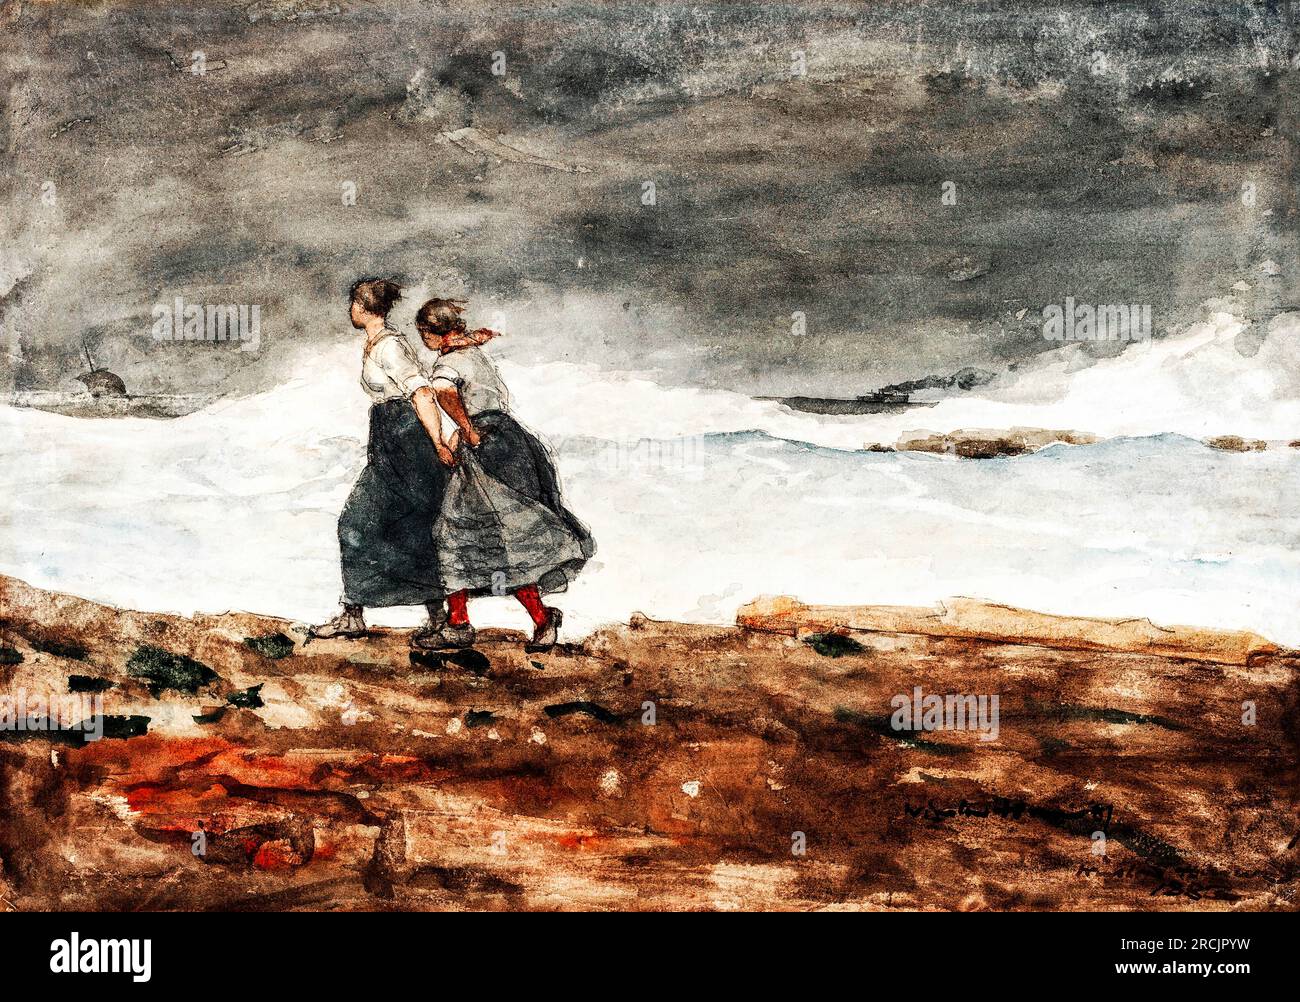 https://c8.alamy.com/comp/2RCJPYW/danger-by-winslow-homer-original-from-the-national-gallery-of-art-2RCJPYW.jpg